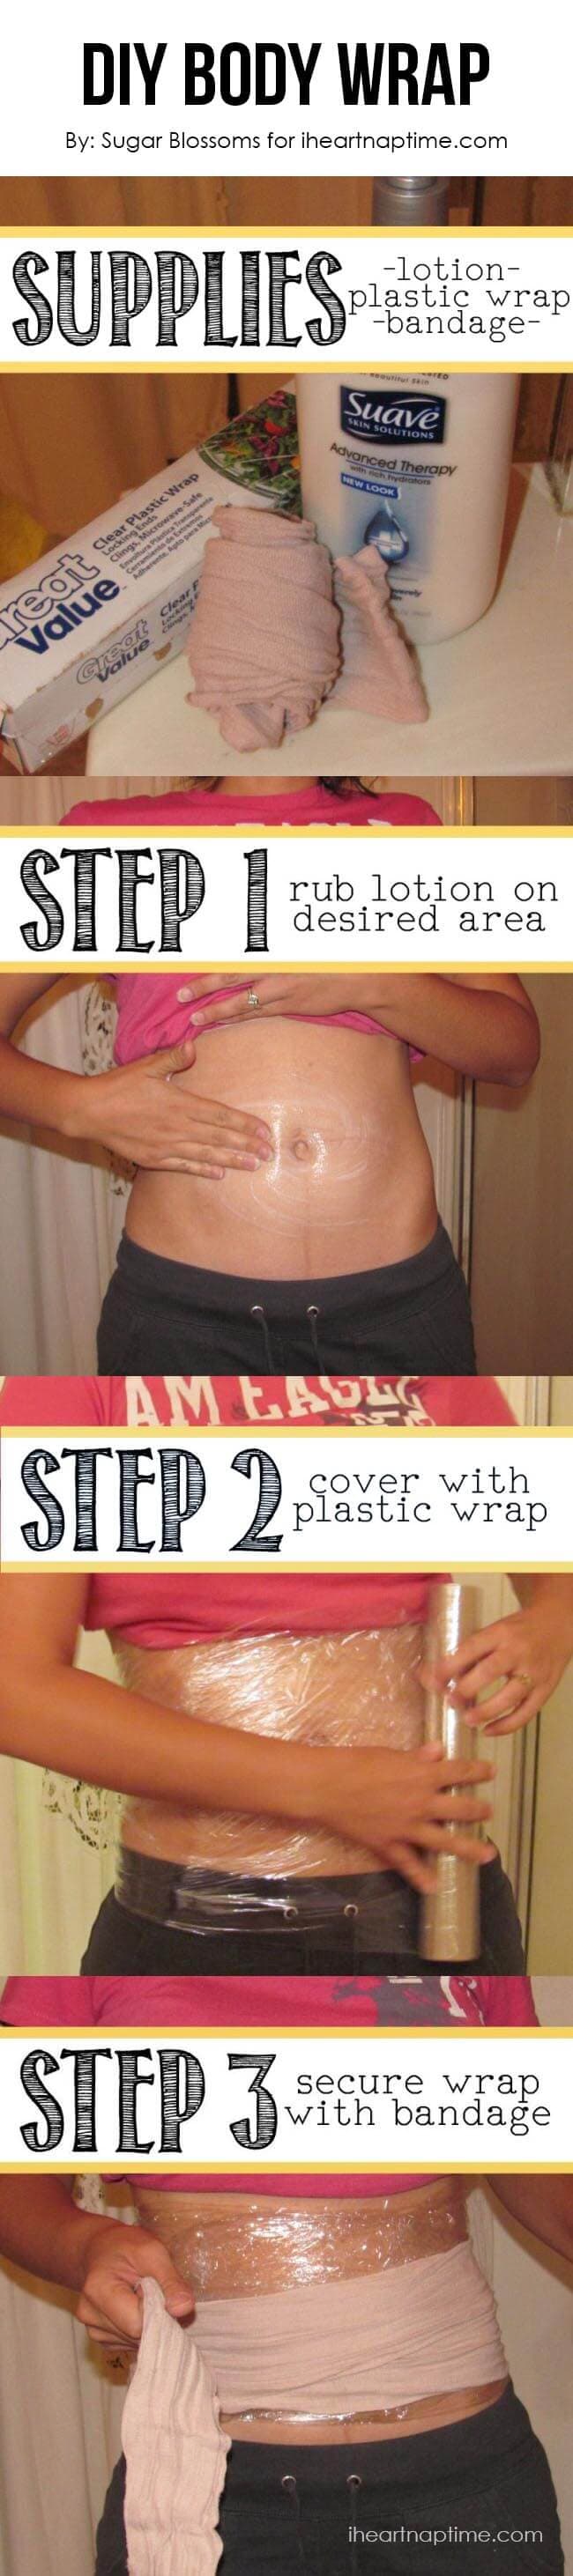 DIY body wrap on iheartnaptime.com with supplies you already have at home ...lose up to 1-2 inches overnight! 